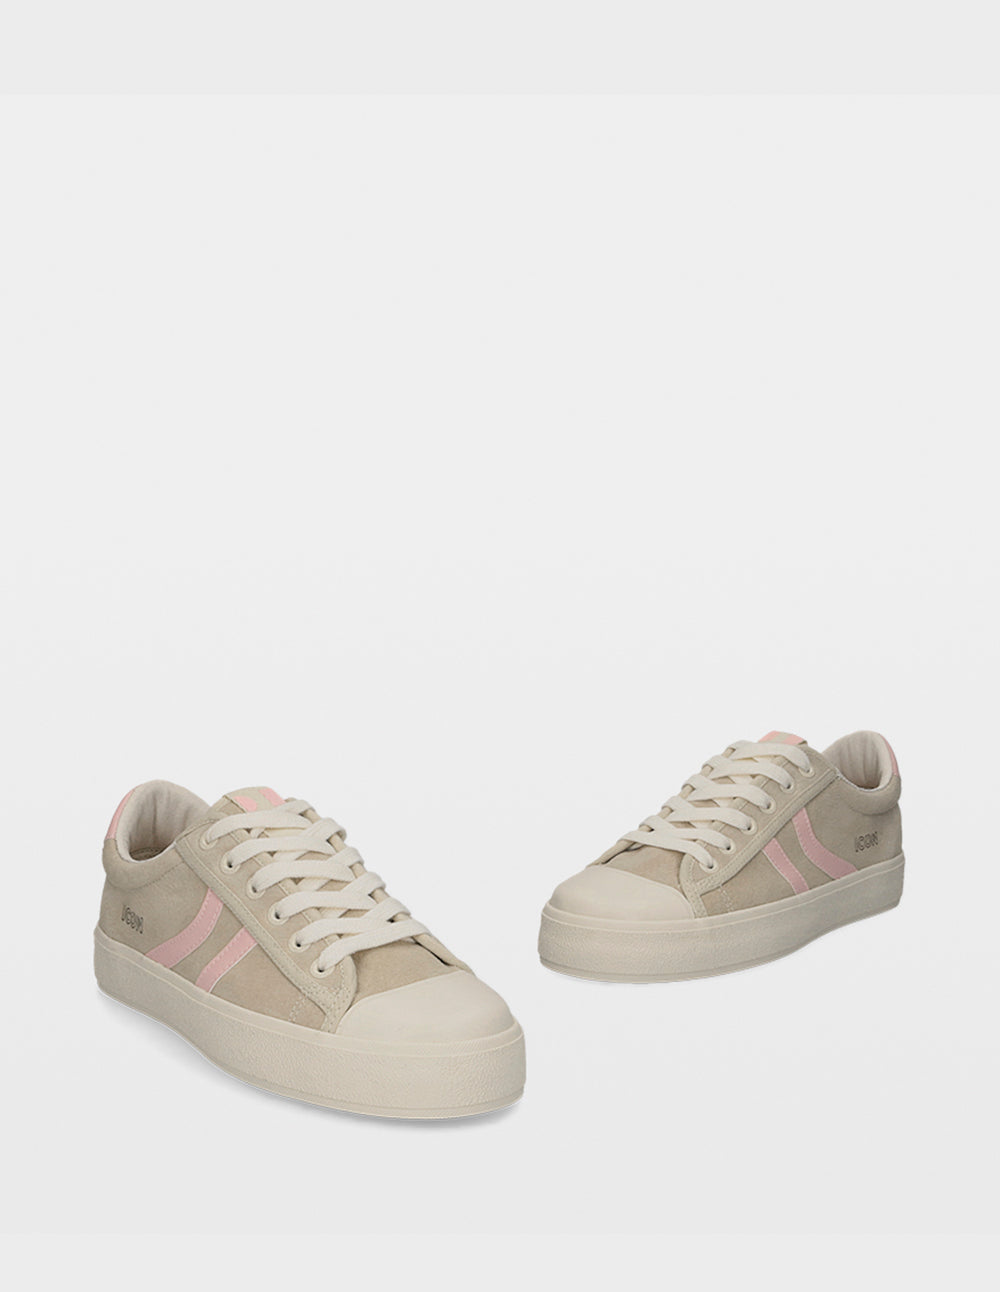 ICON-ONE BEIGE/PINK LEATHER MUJER